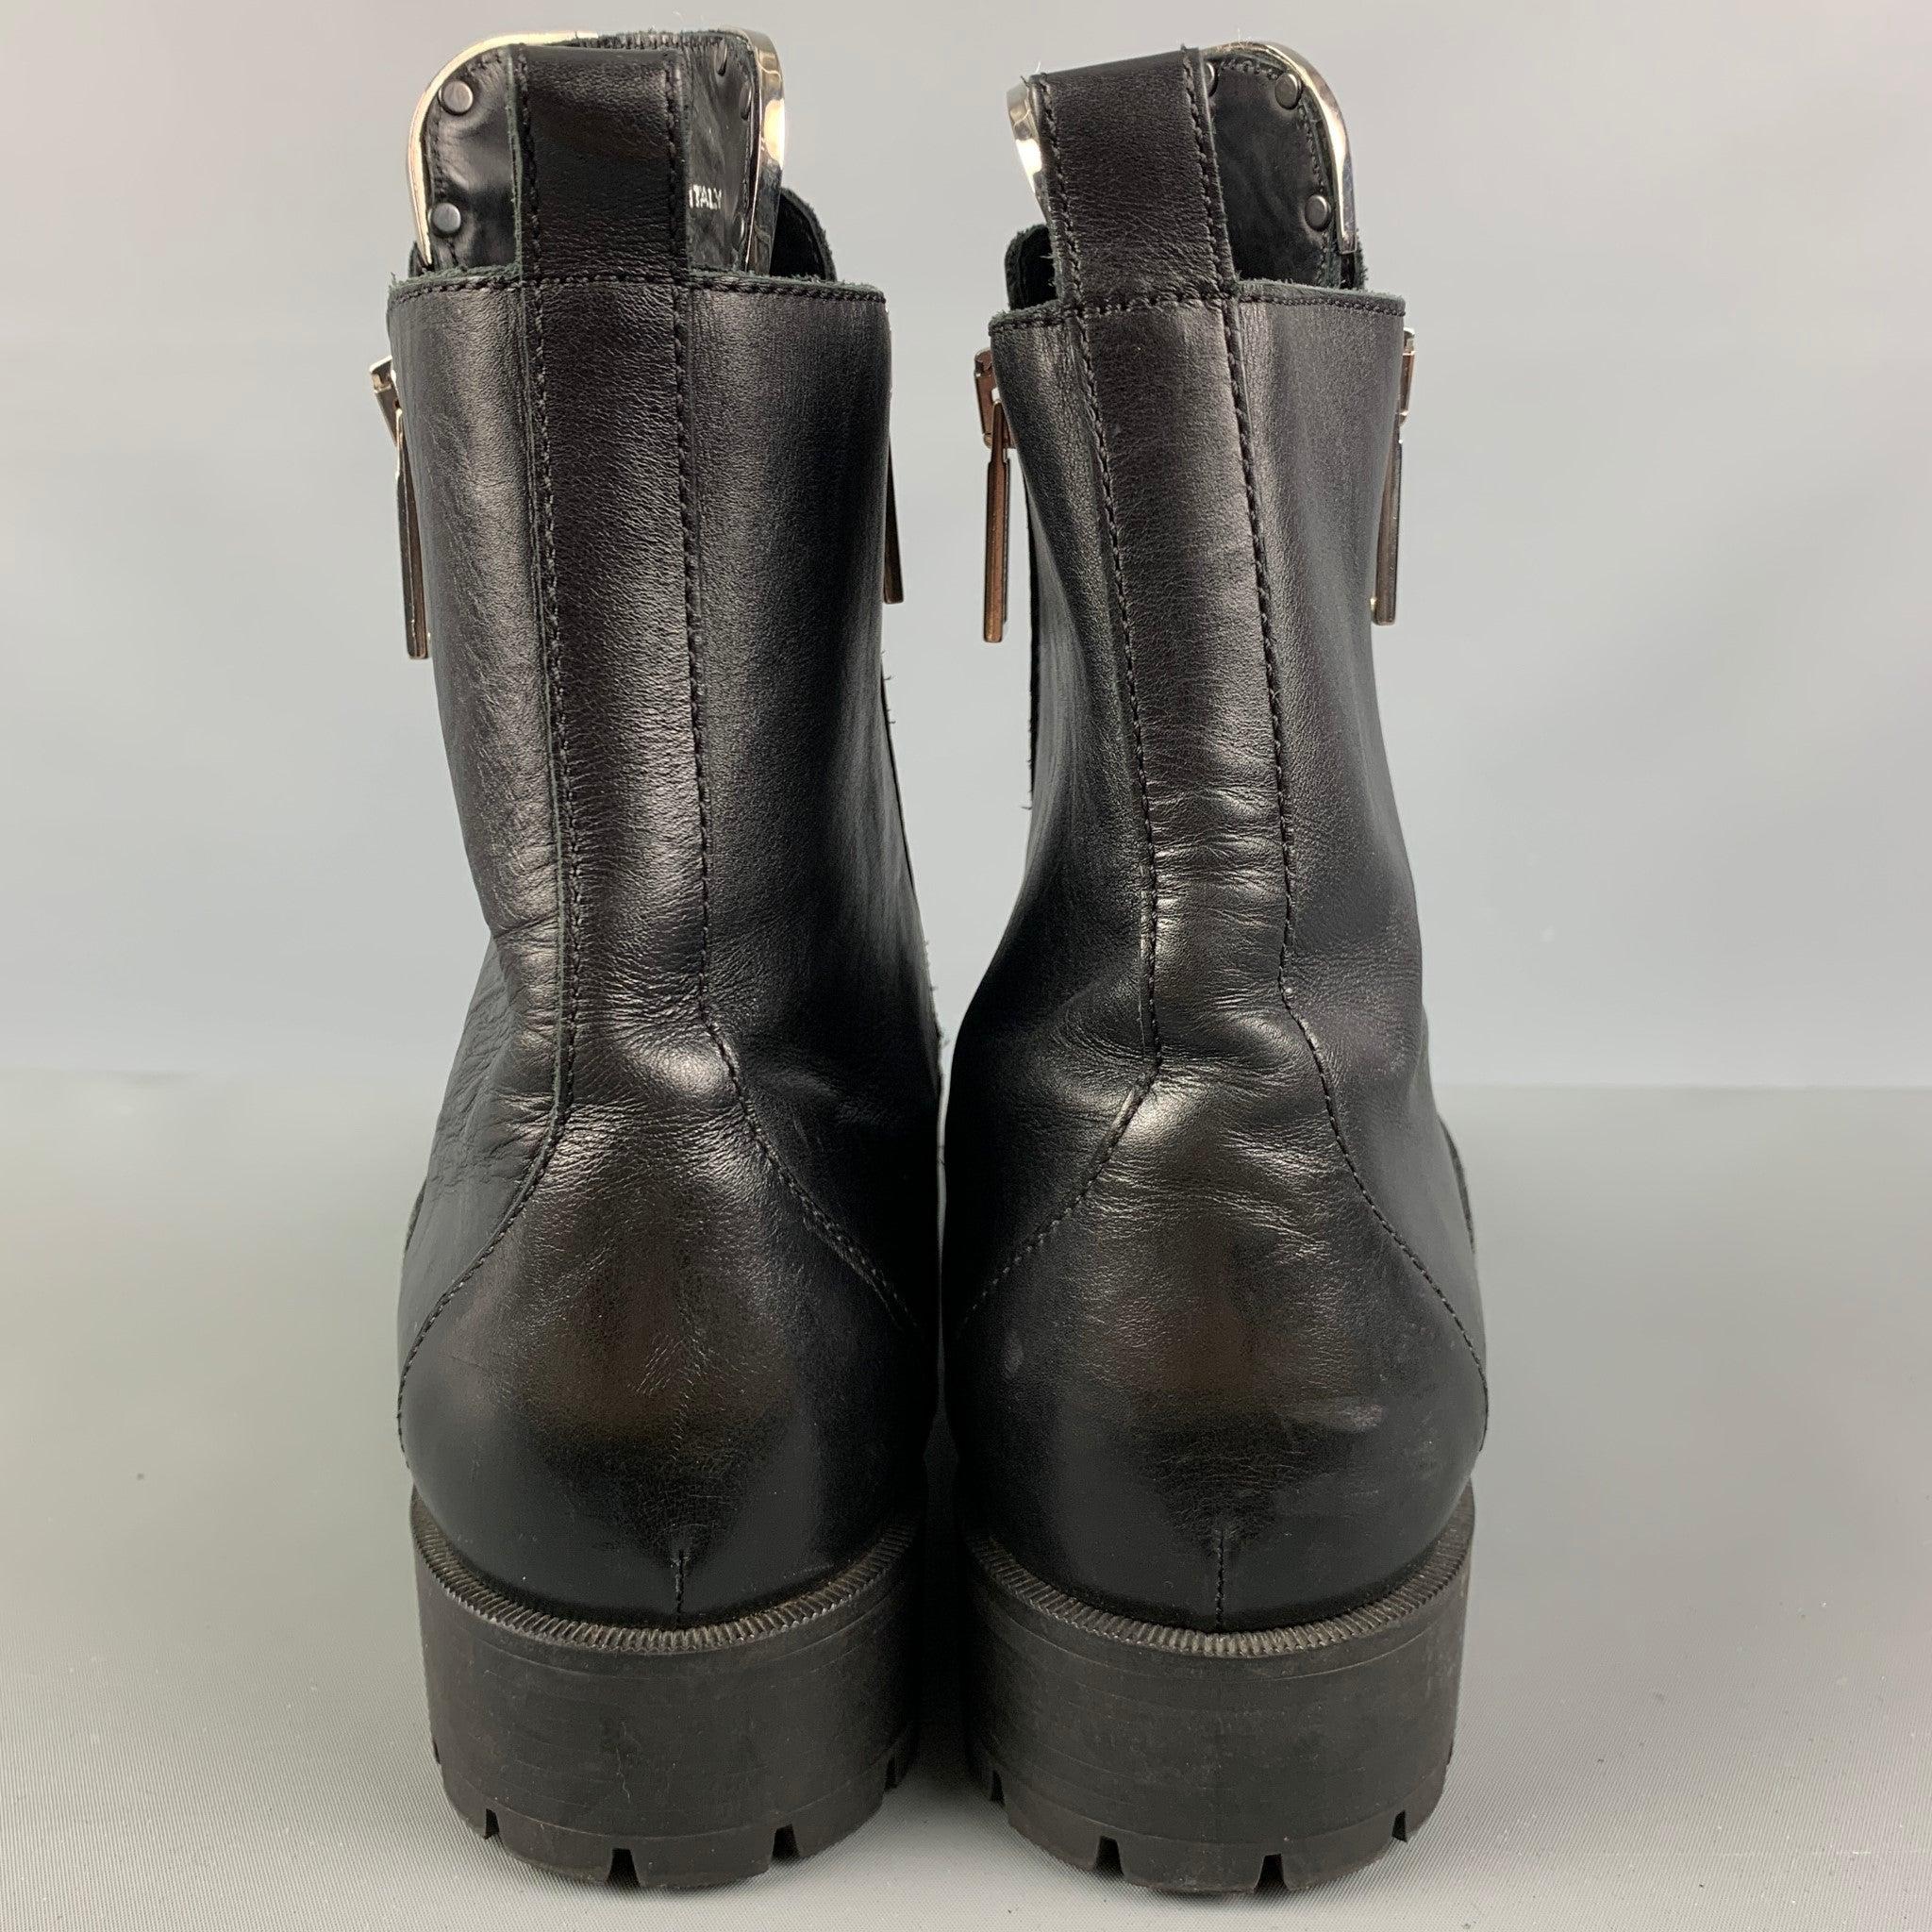 DSQUARED2 Size 11 Black Leather Double Zipper Boots In Good Condition For Sale In San Francisco, CA